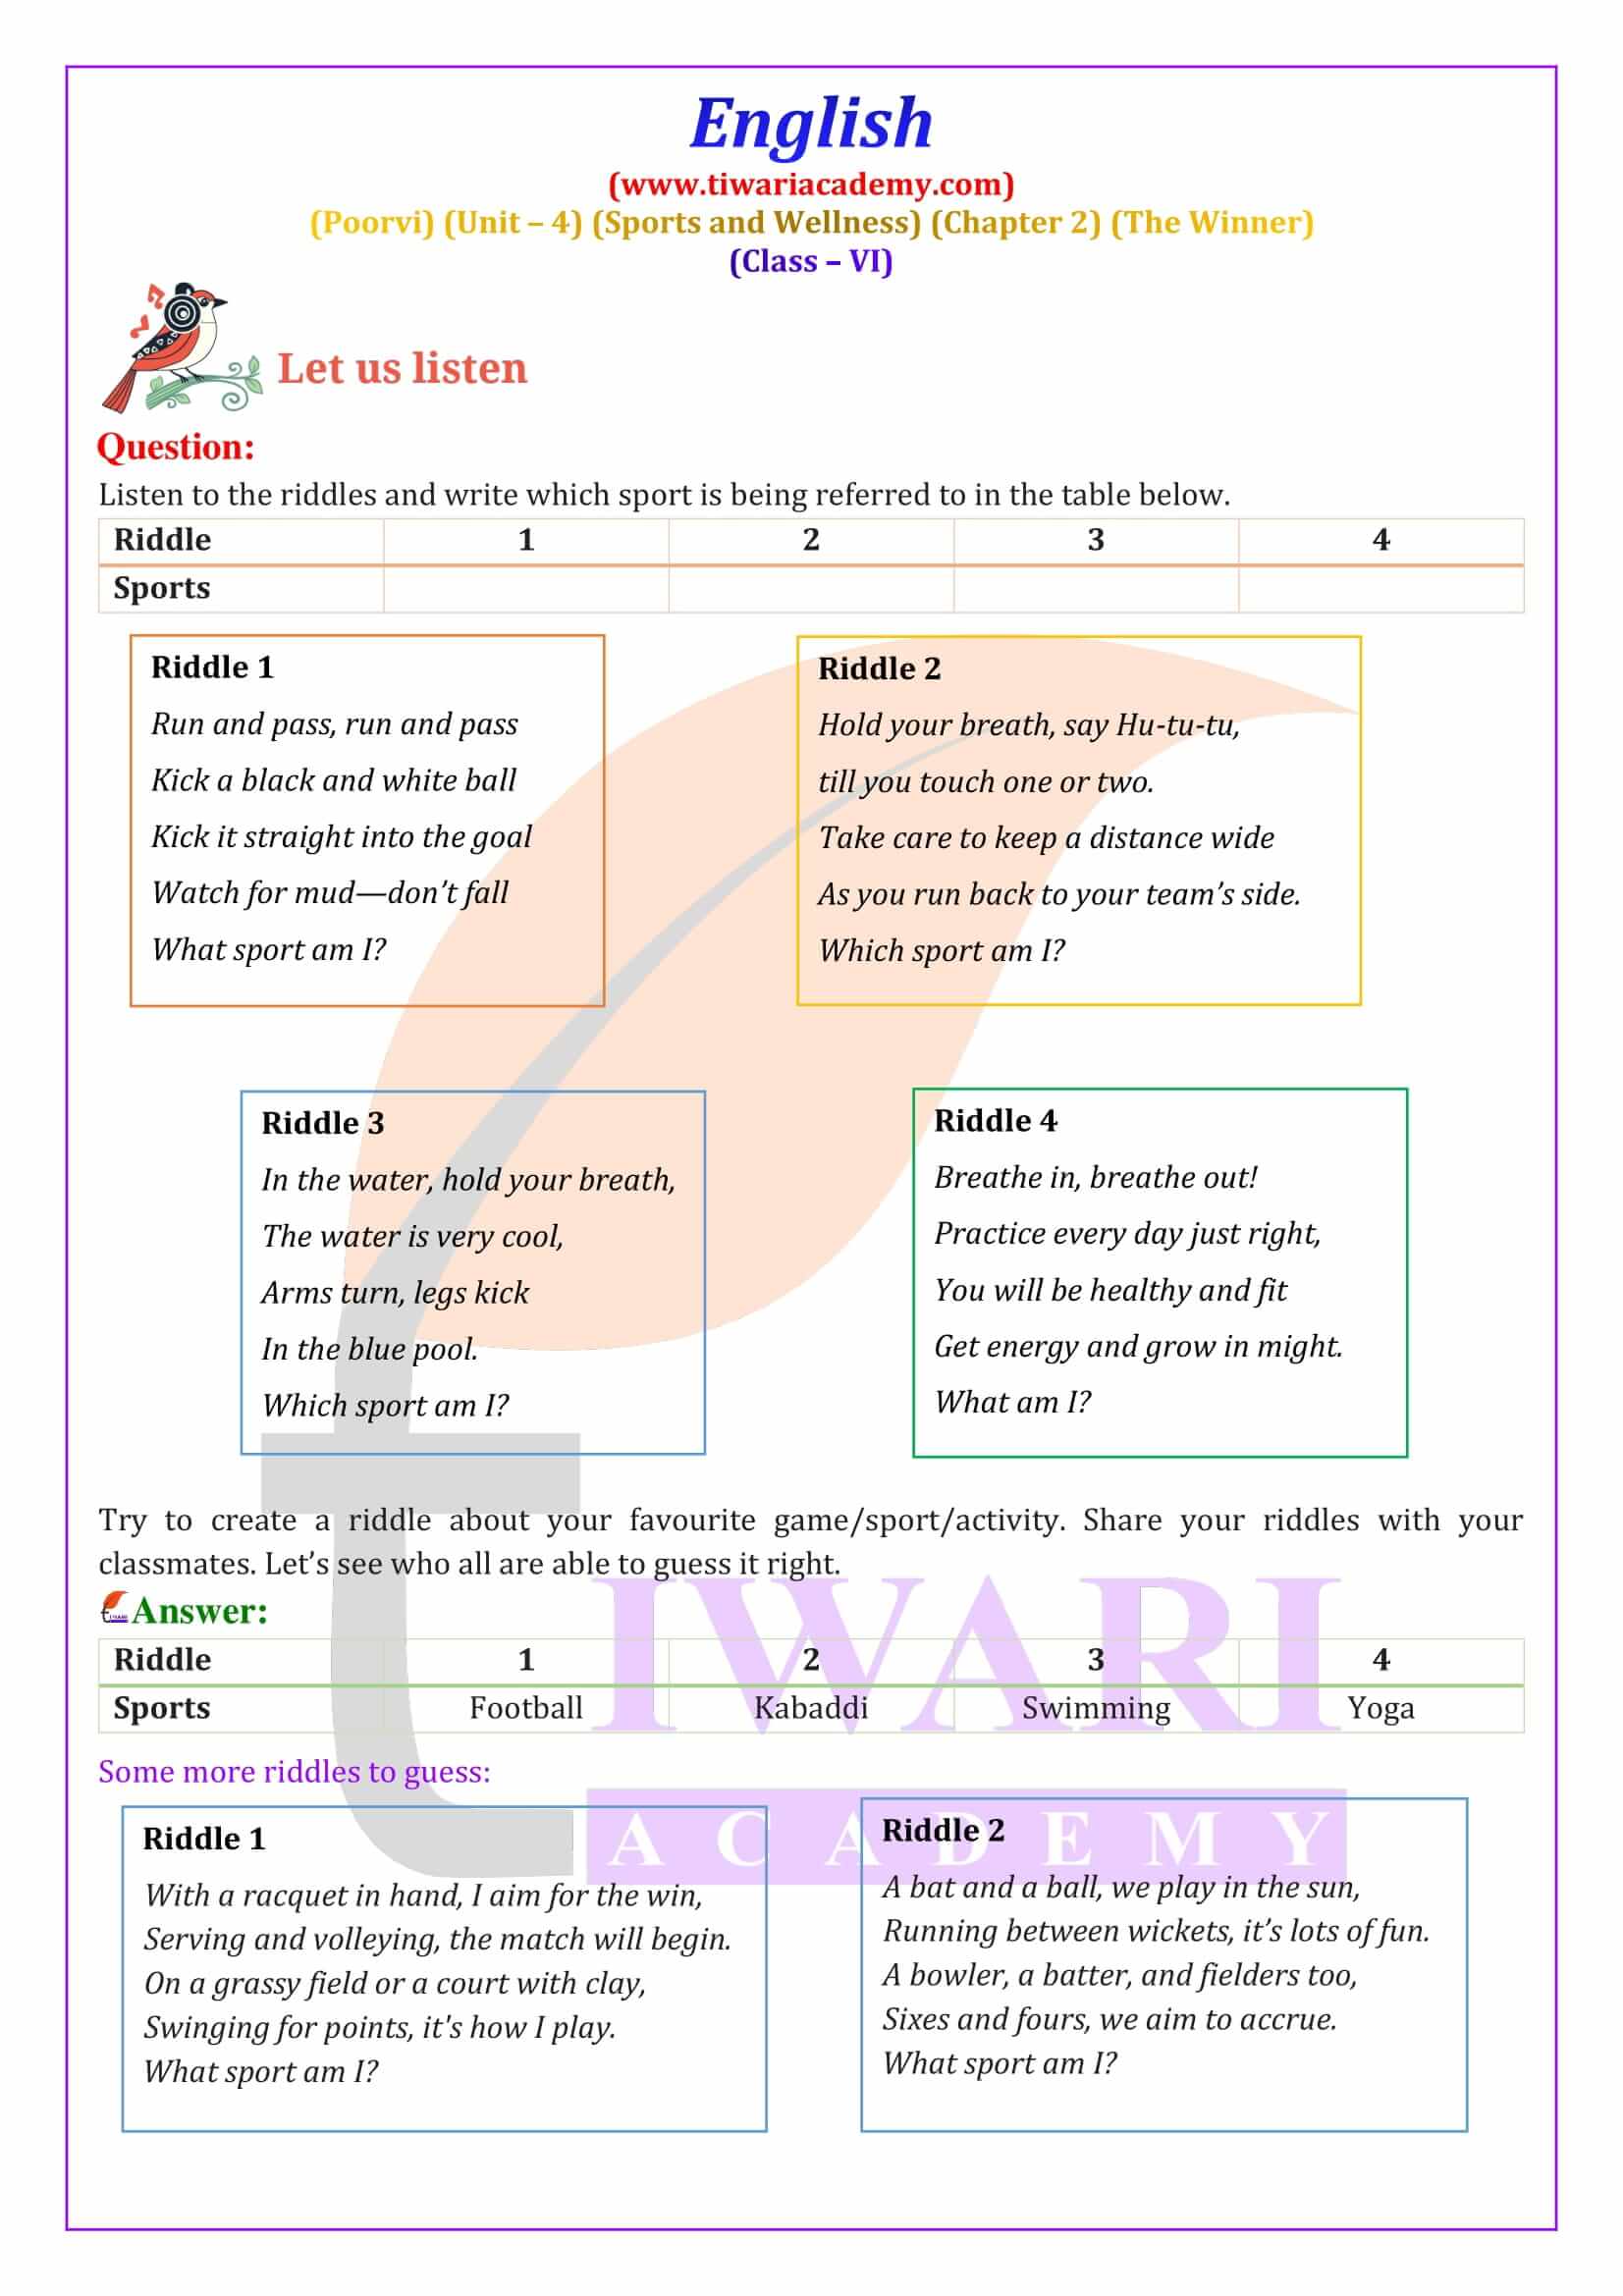 Class 6 English Poorvi Unit 4 Sports and Wellness Chapter 2 Solutions